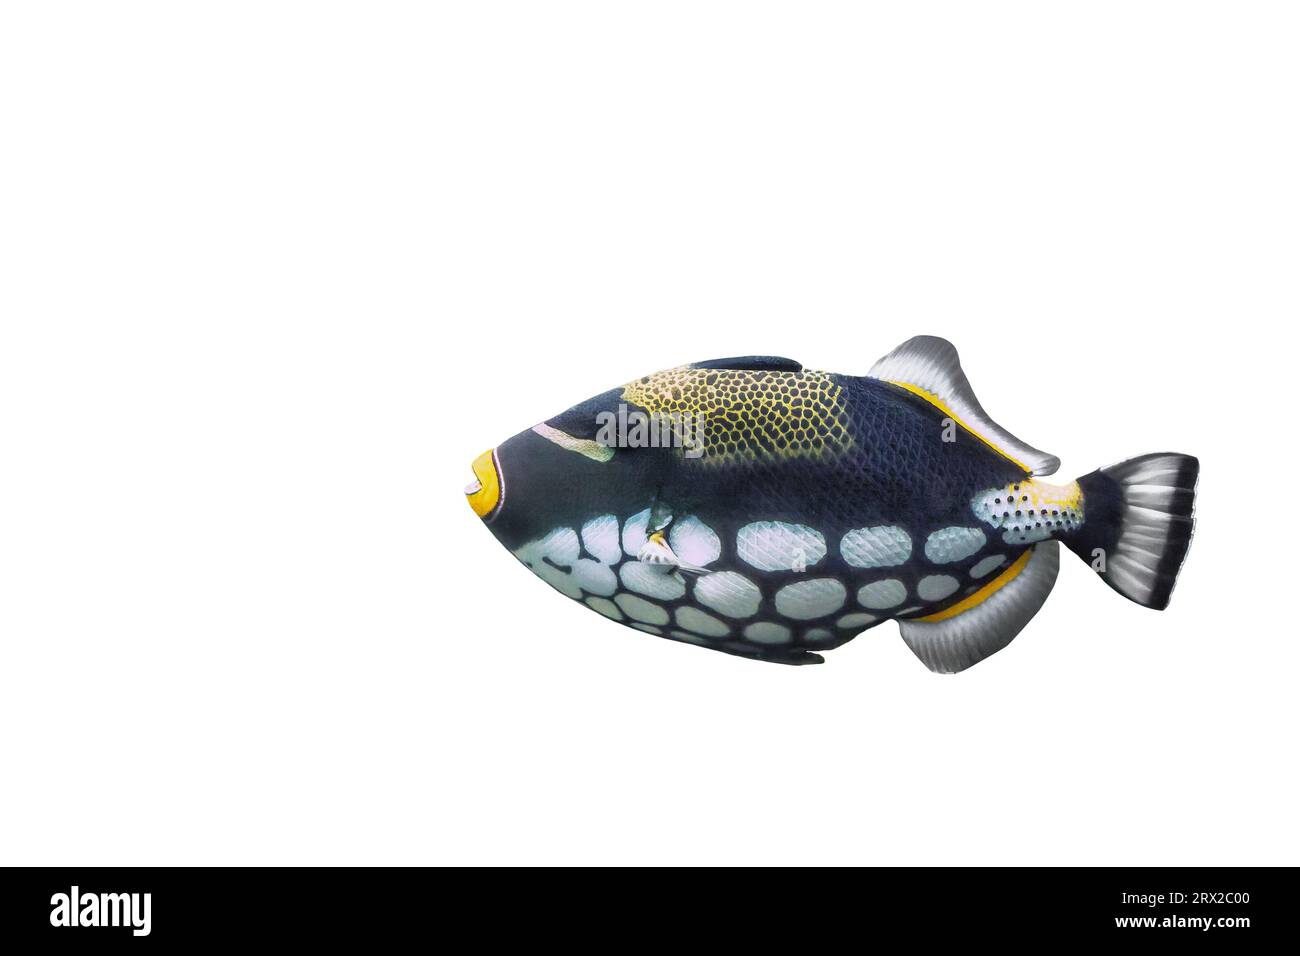 Big Clown Triggerfish isolated on white background. Colorful clownfish swimming cut out icon, side view. Balistoides conspicillum marine tropic fish c Stock Photo